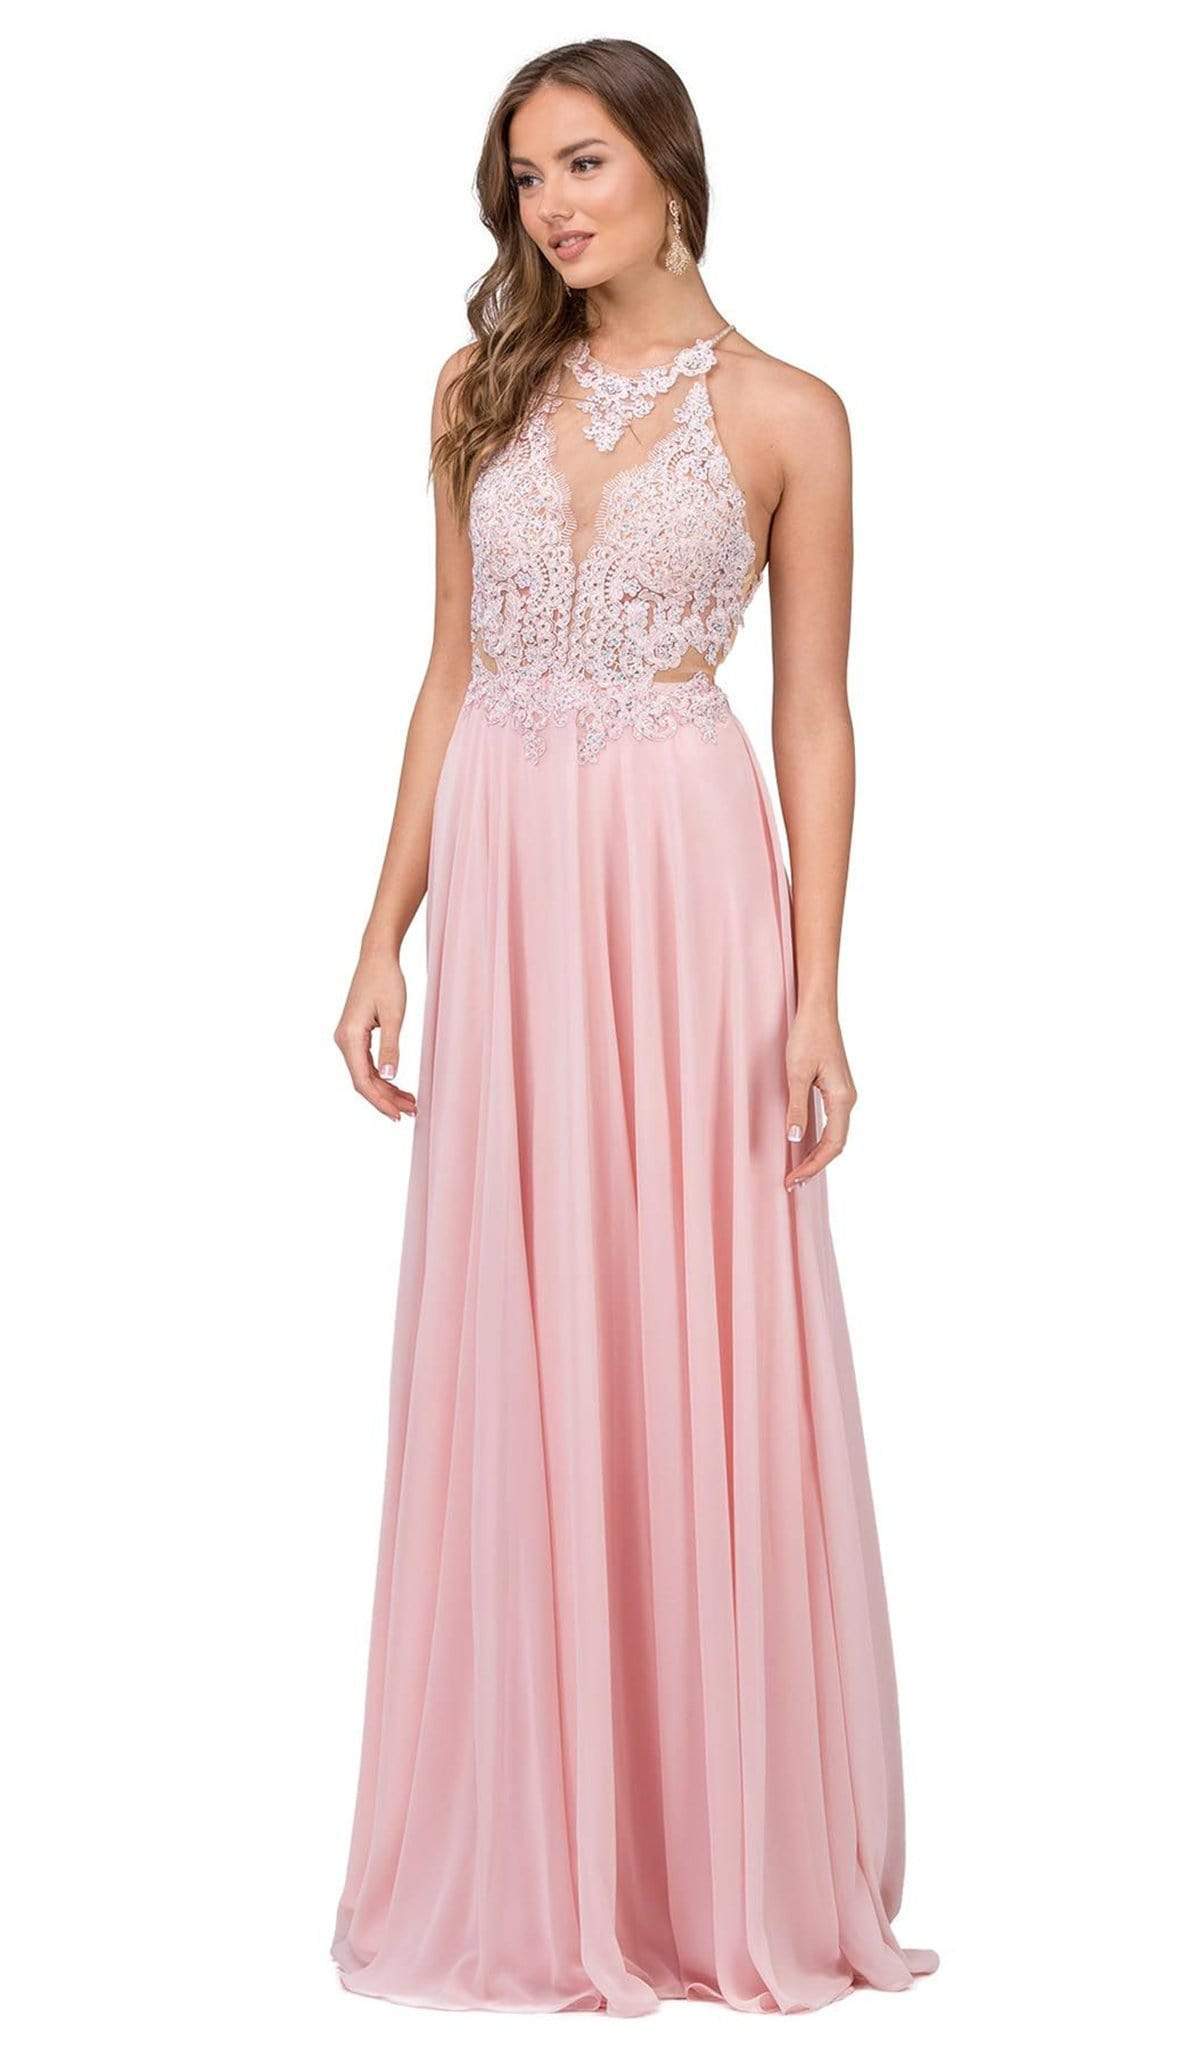 Image of Dancing Queen - 2015 Lace Embellished Illusion Bodice Chiffon Gown